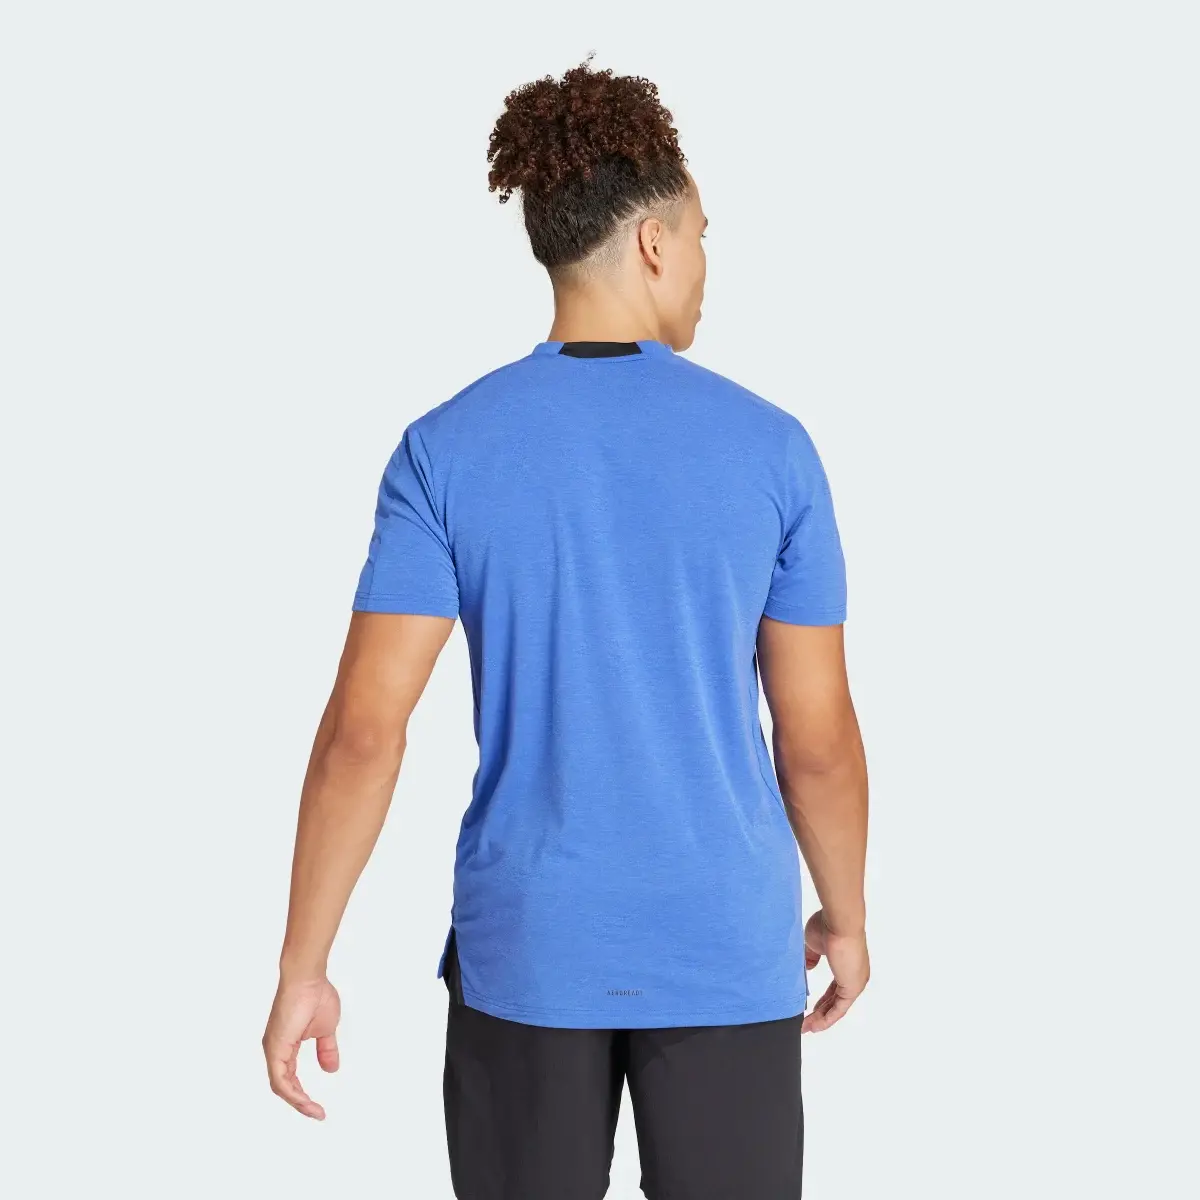 Adidas Designed for Training Workout Tee. 2